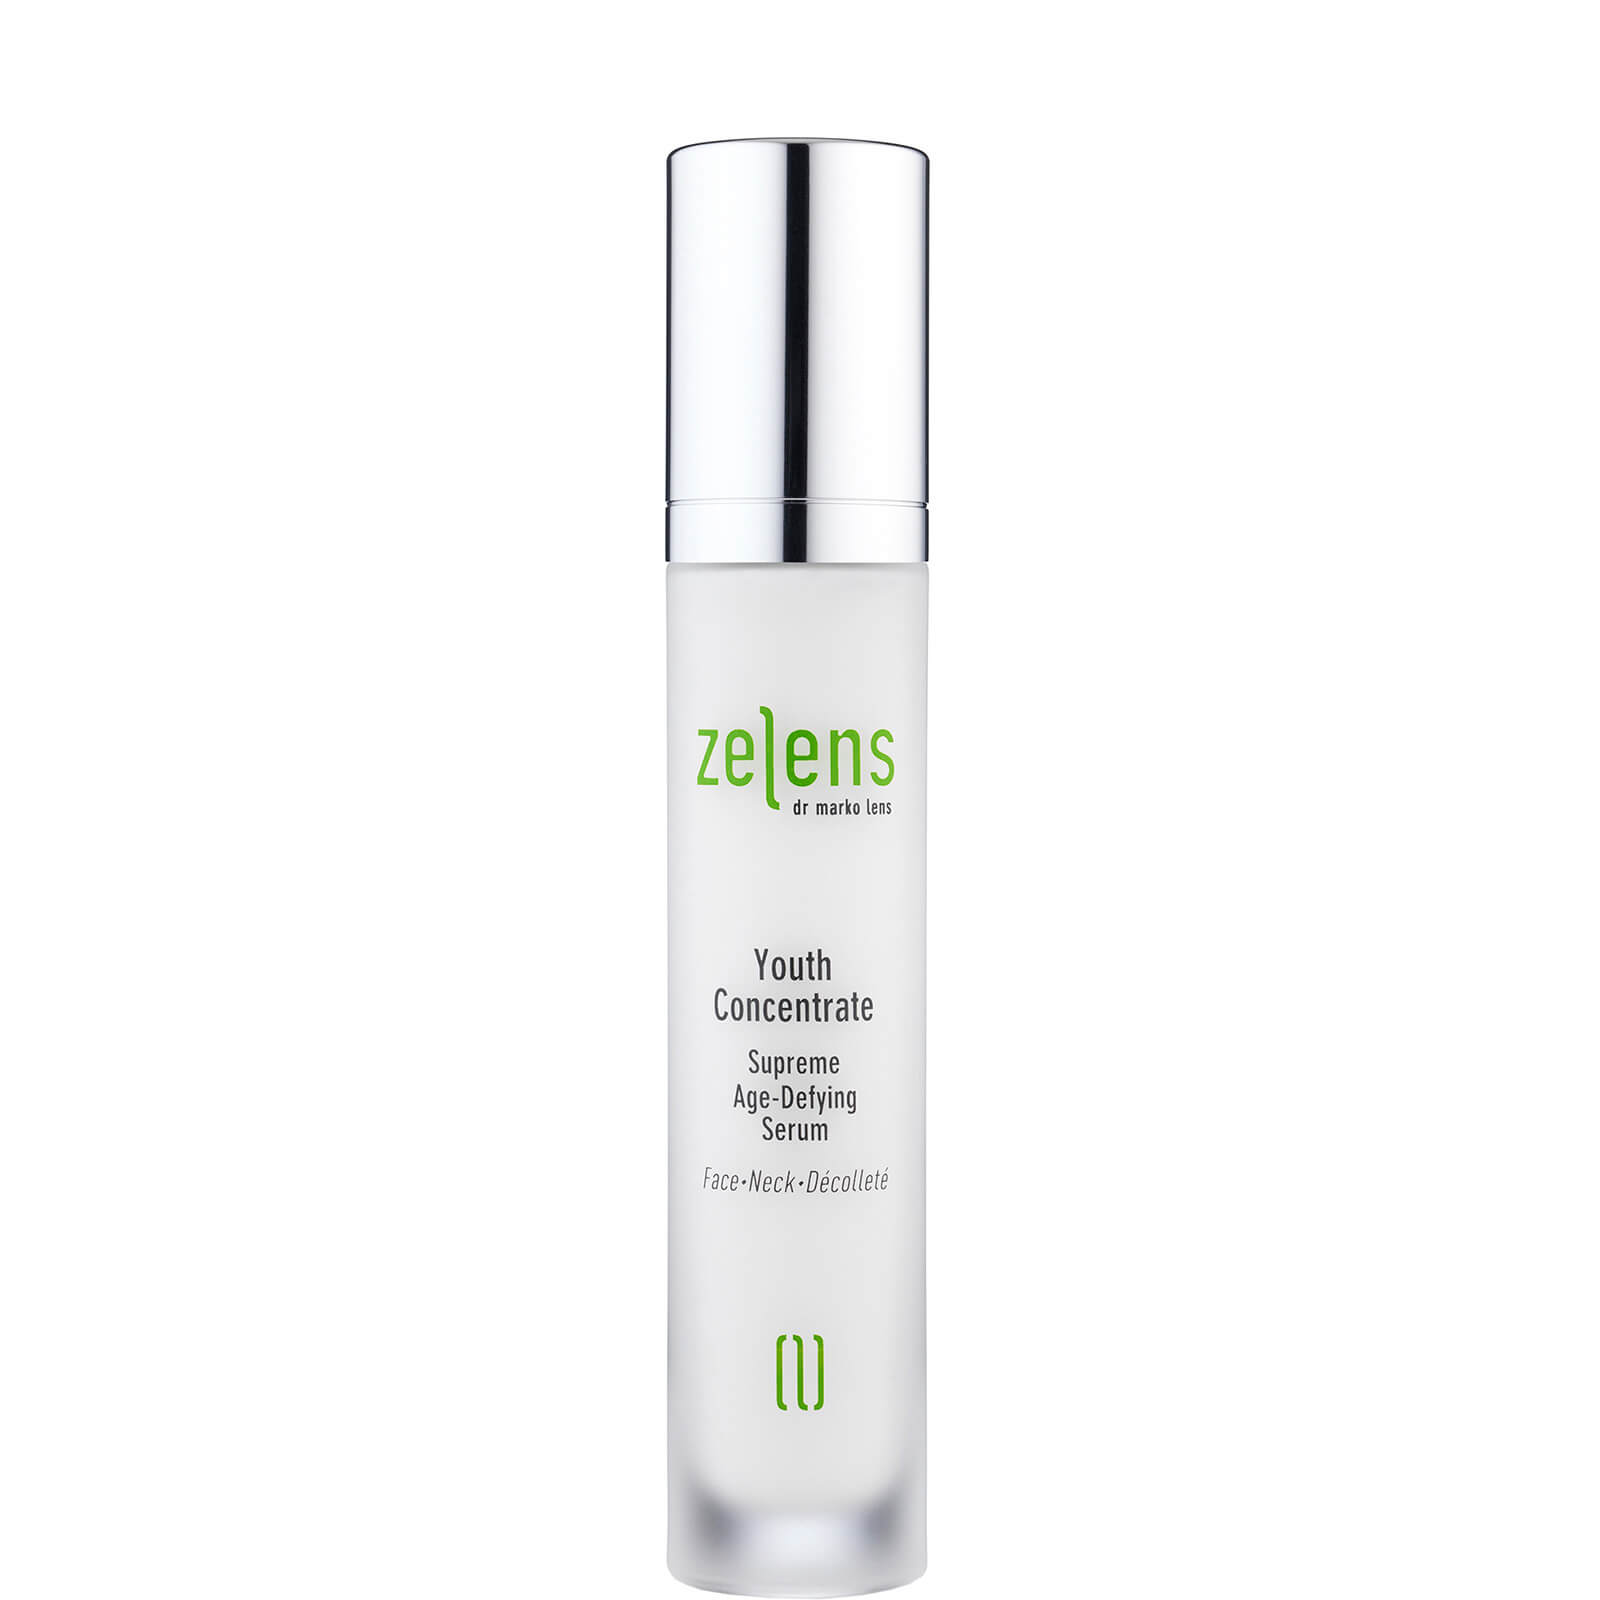 Sérum Antienvejecimiento Zelens Youth Concentrate Supreme Age-Defying (30ml)